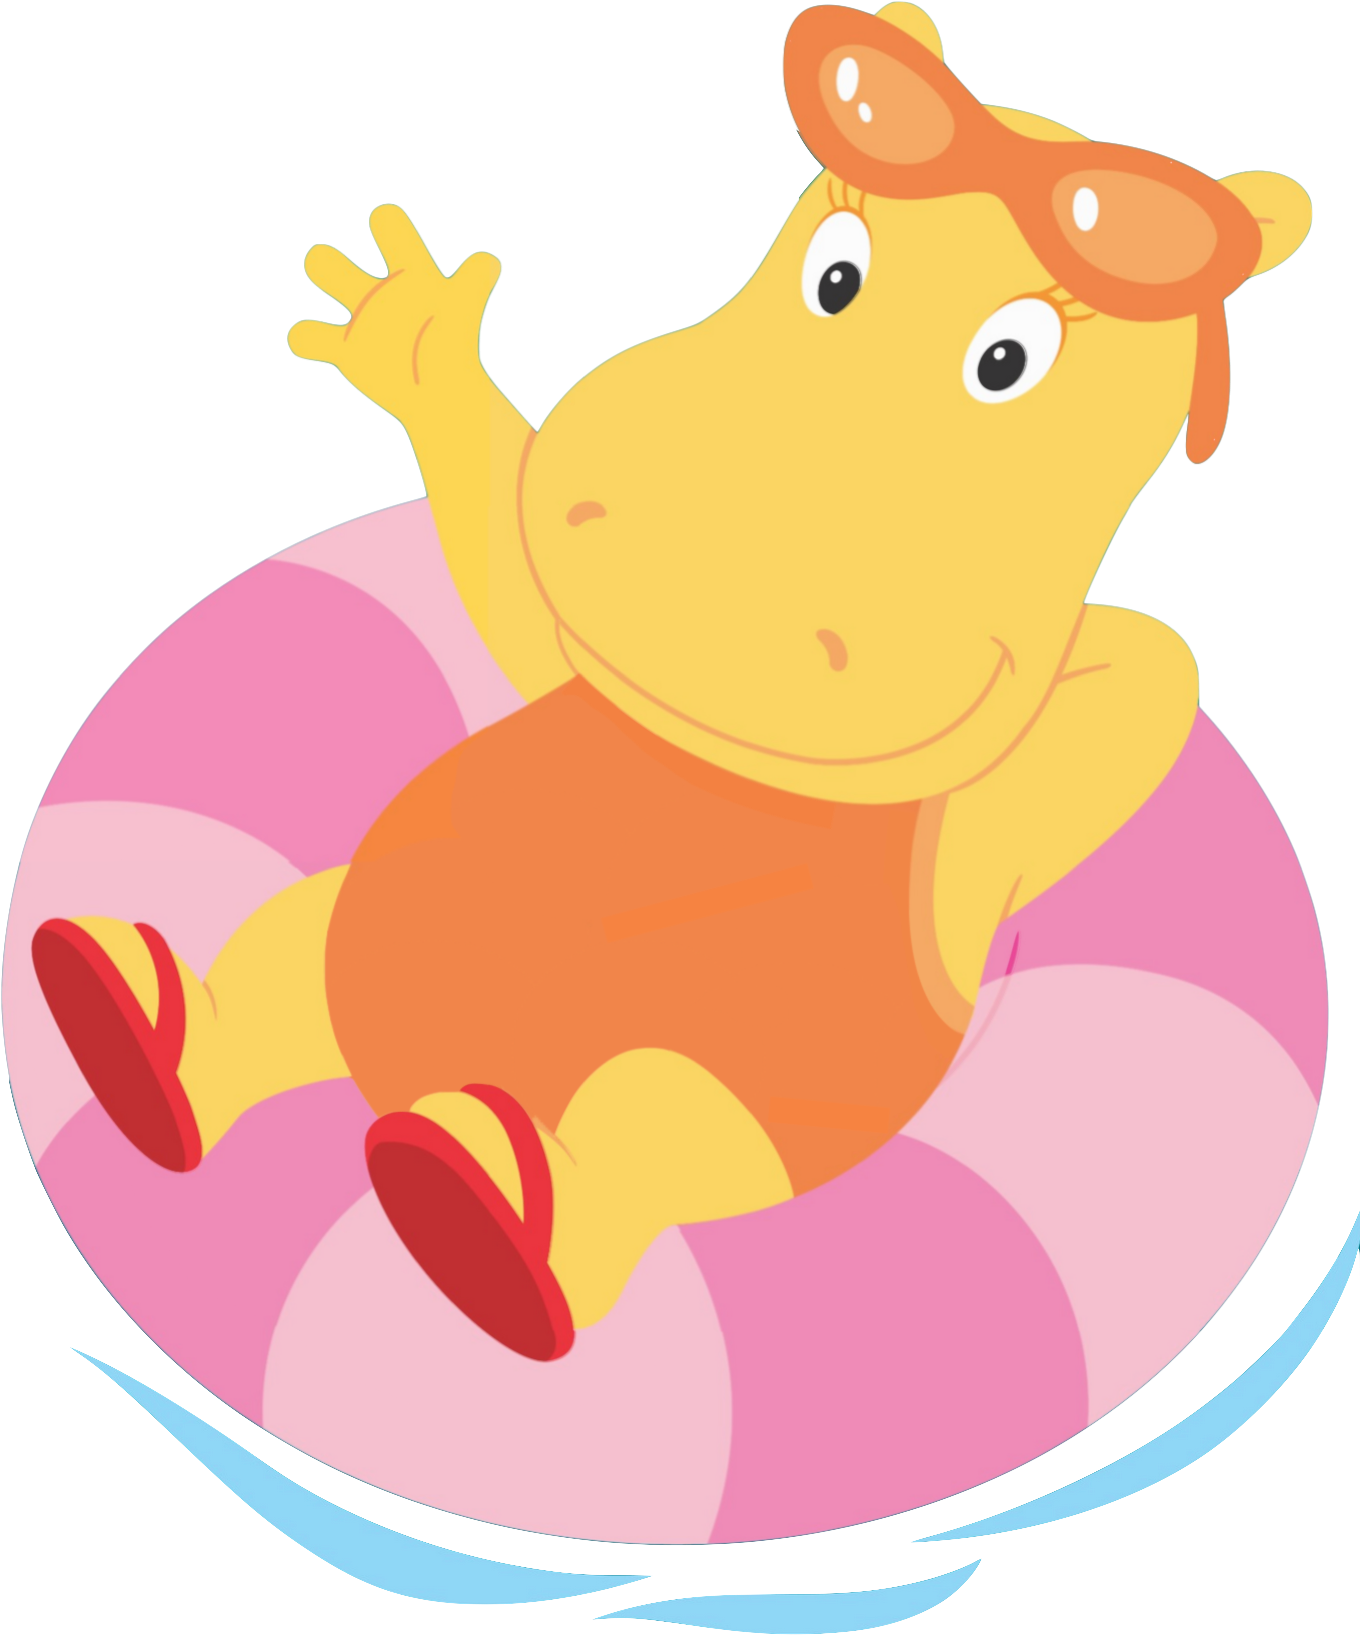 Download and share clipart about The Backyardigans Tasha Swimming - Backyar...